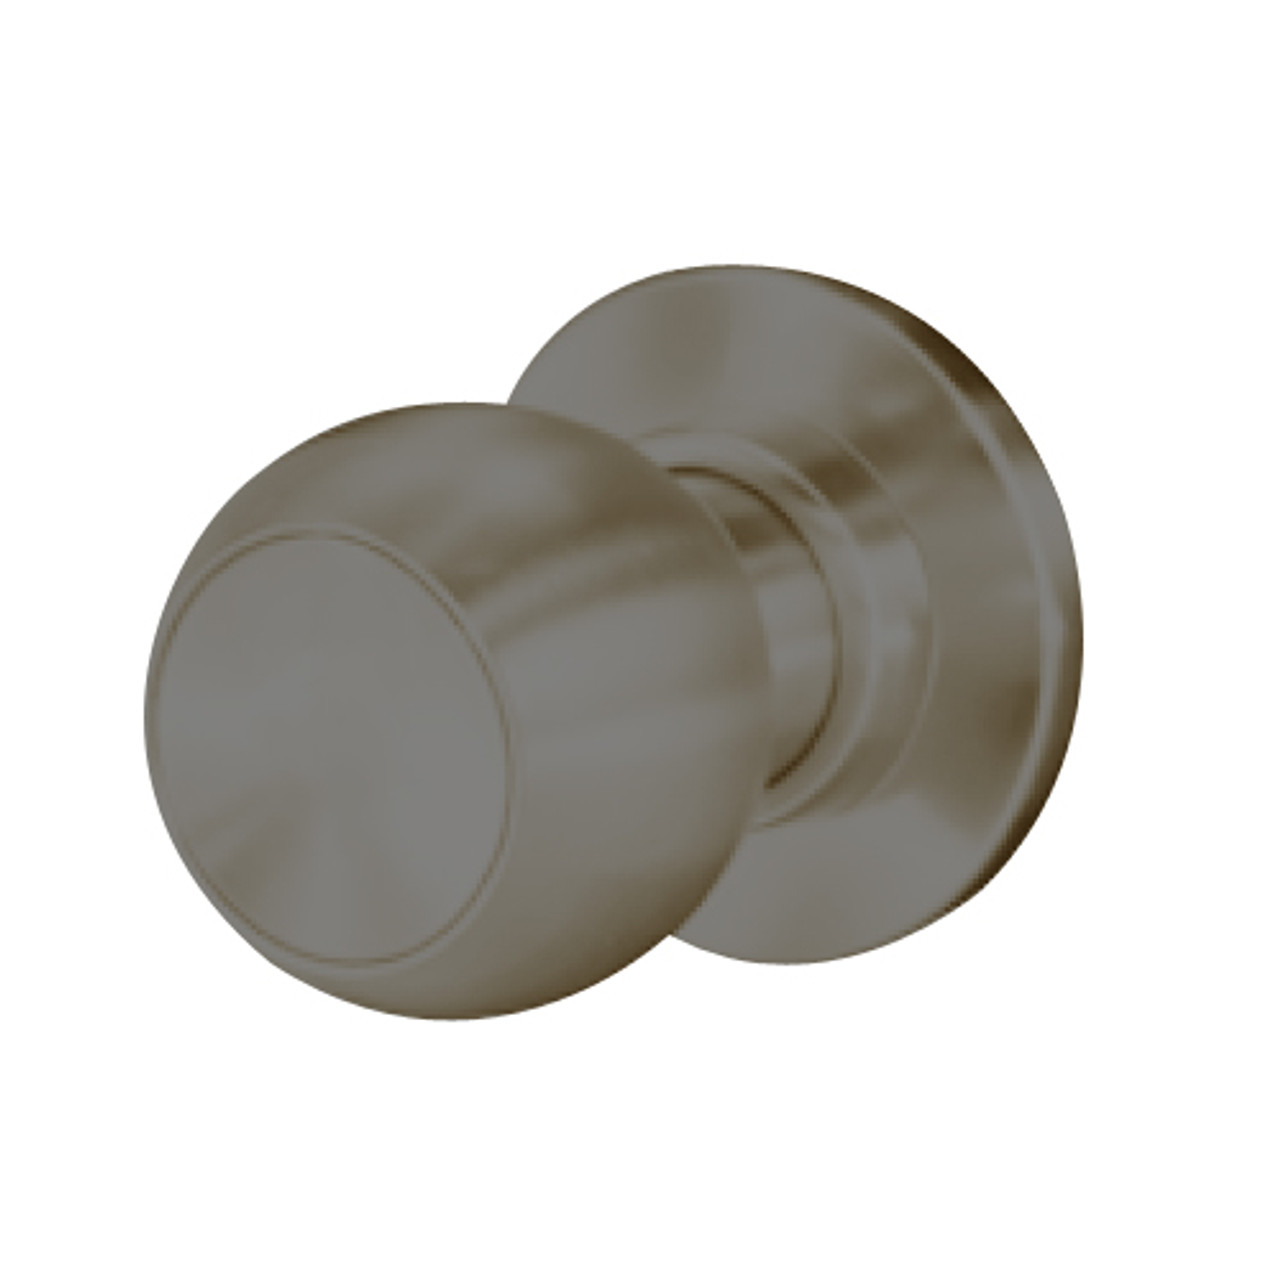 8K30M4CSTK613 Best 8K Series Communicating Heavy Duty Cylindrical Knob Locks with Round Style in Oil Rubbed Bronze